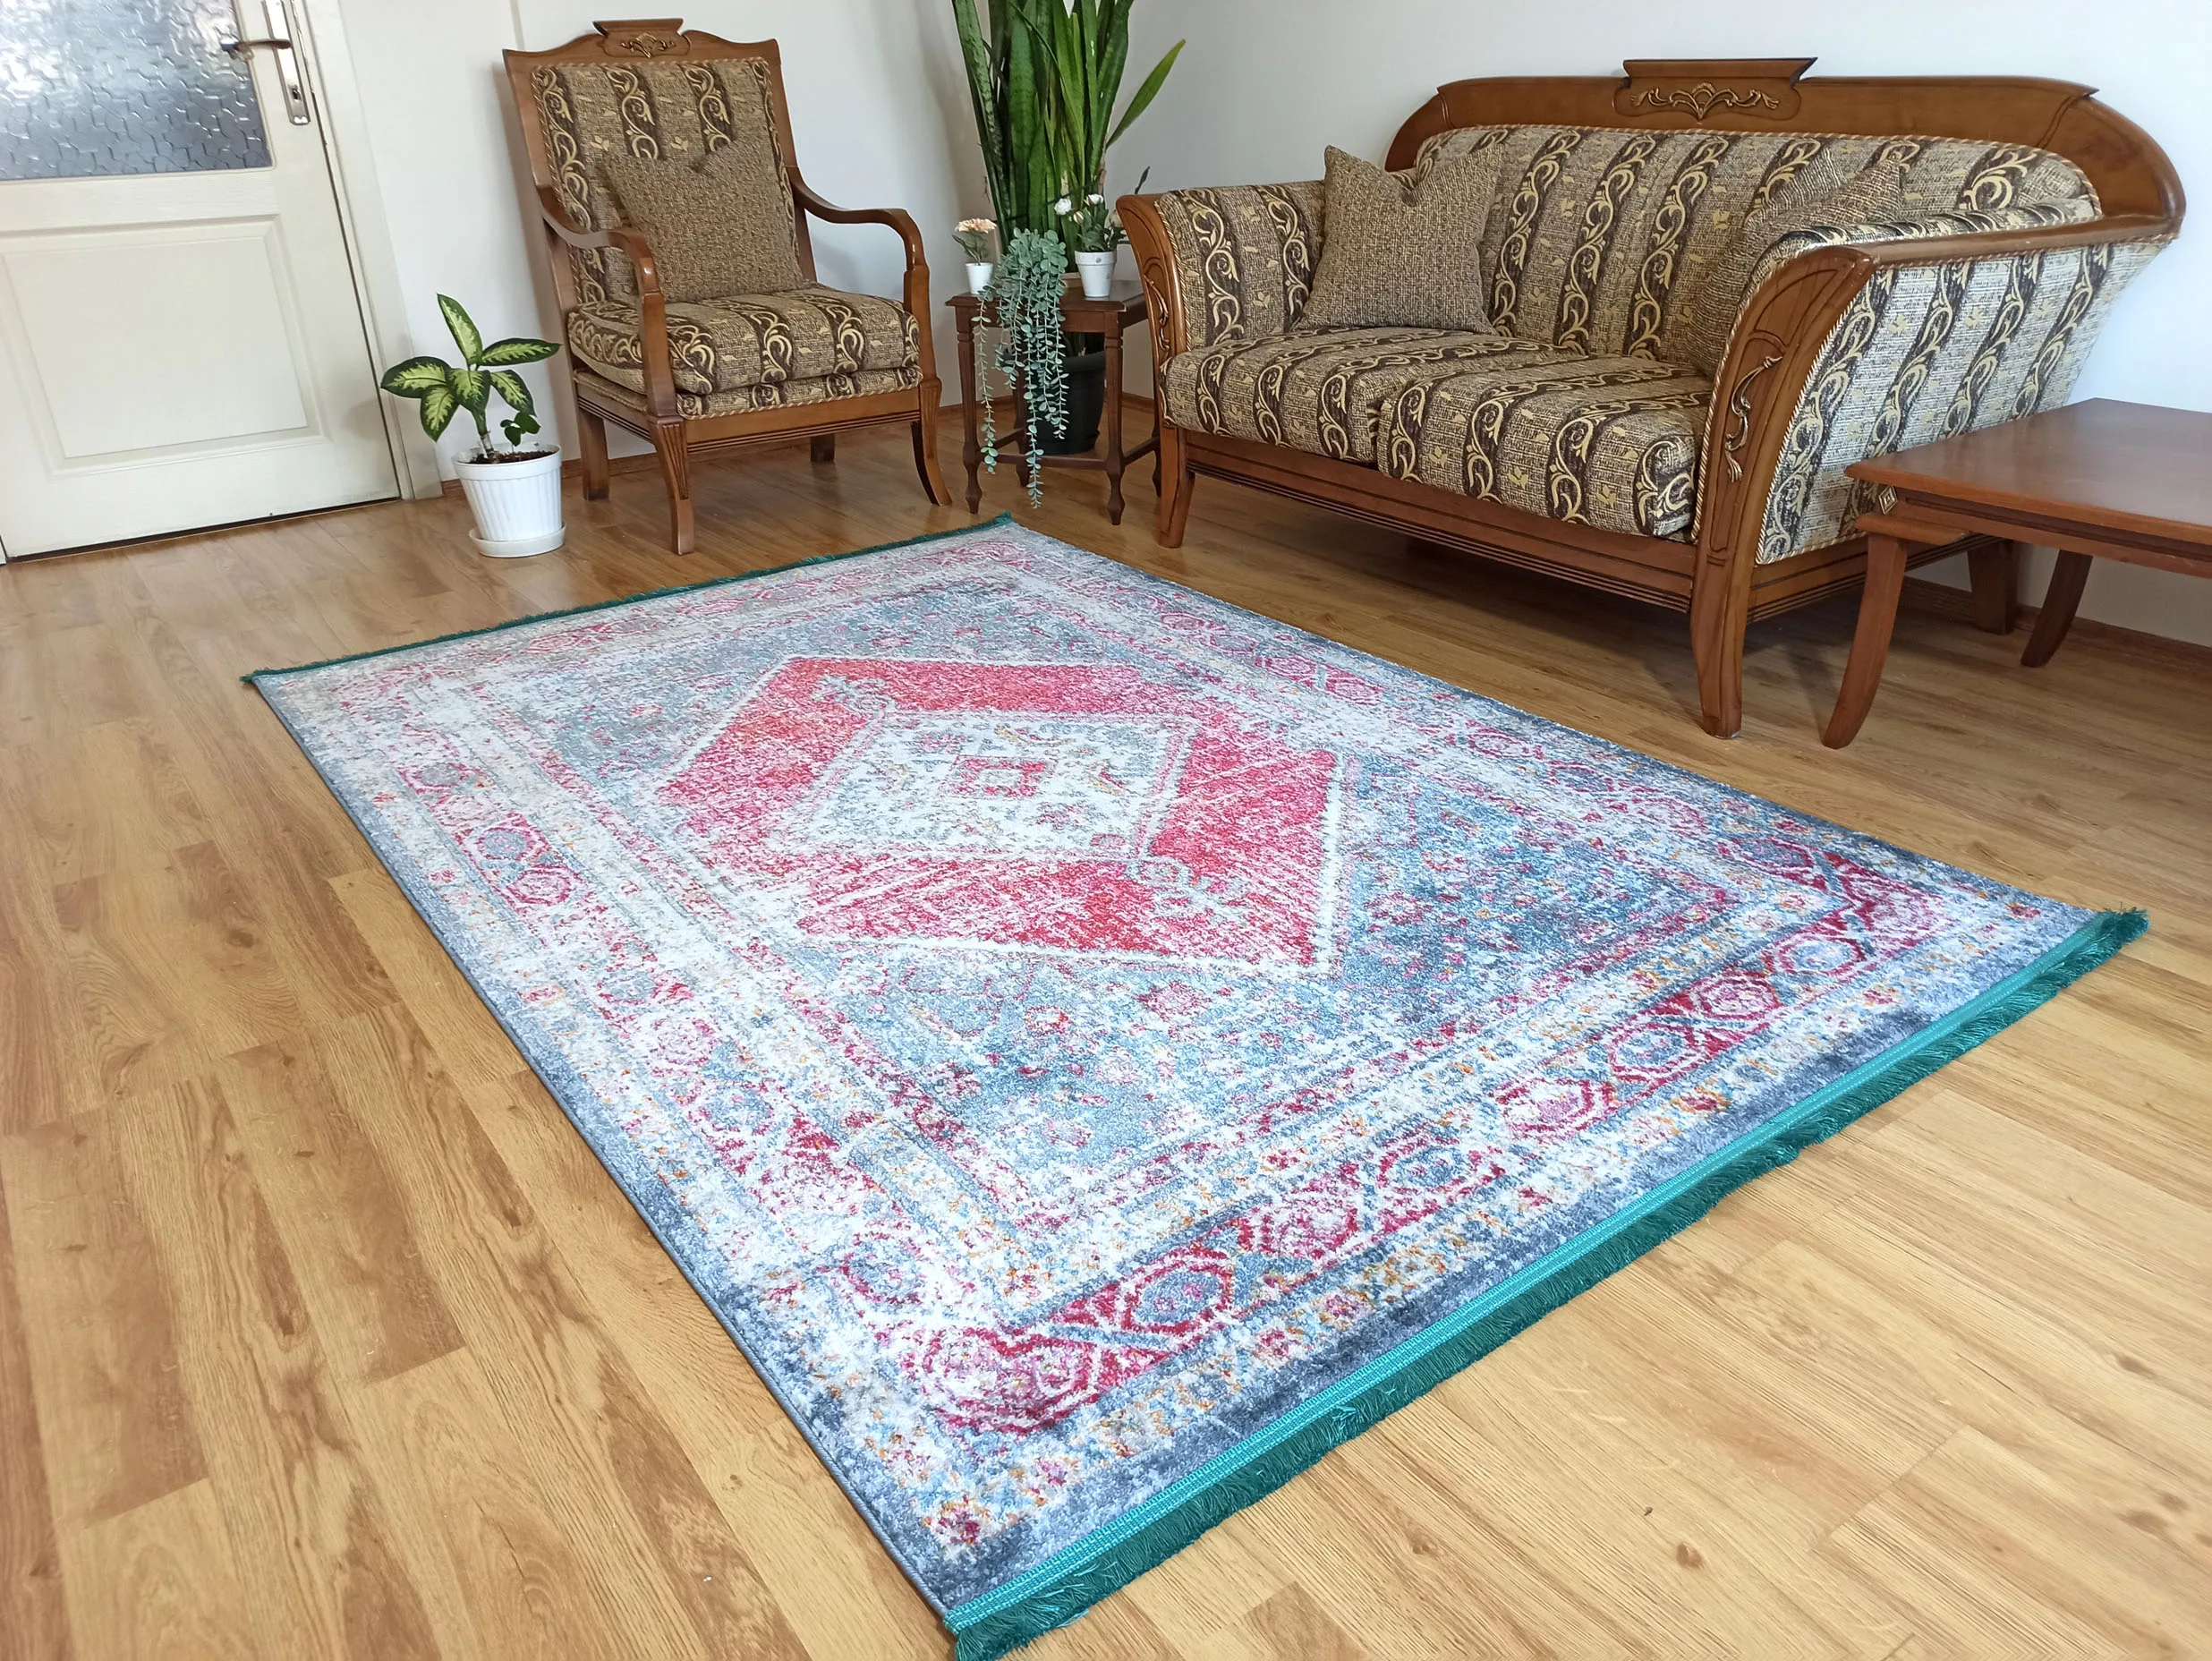 

Persian Heriz Green Red Rug, Geometric Floral Ethnic Medallion Rugs, Traditional Rug, Boho Faded Distressed design, Living Room